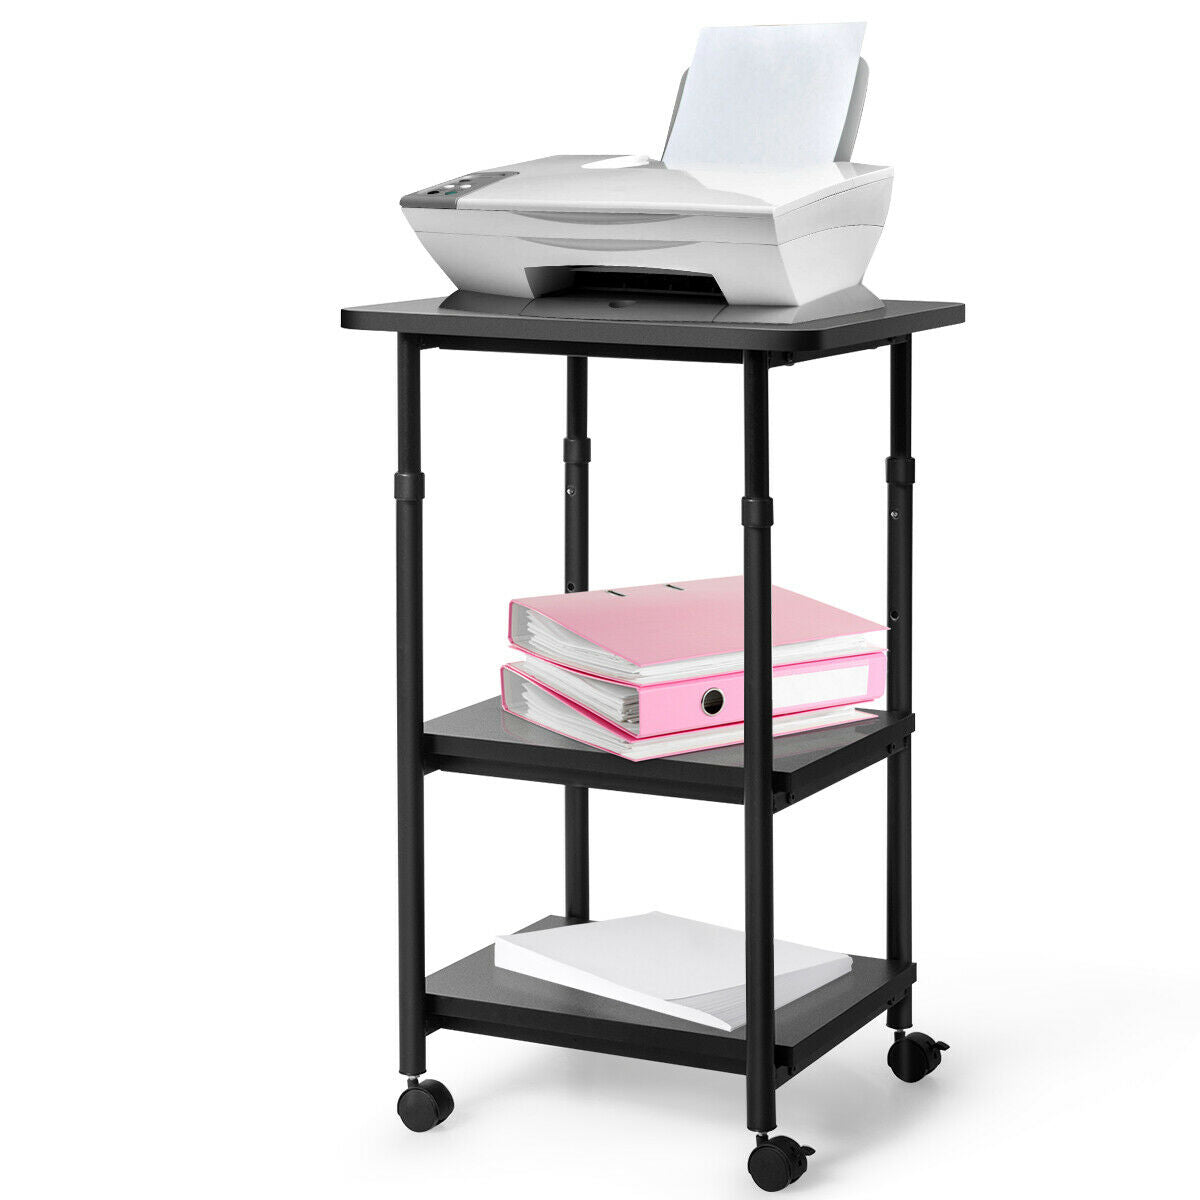 3-tier Adjustable Printer Stand with 360° Swivel Casters-Black